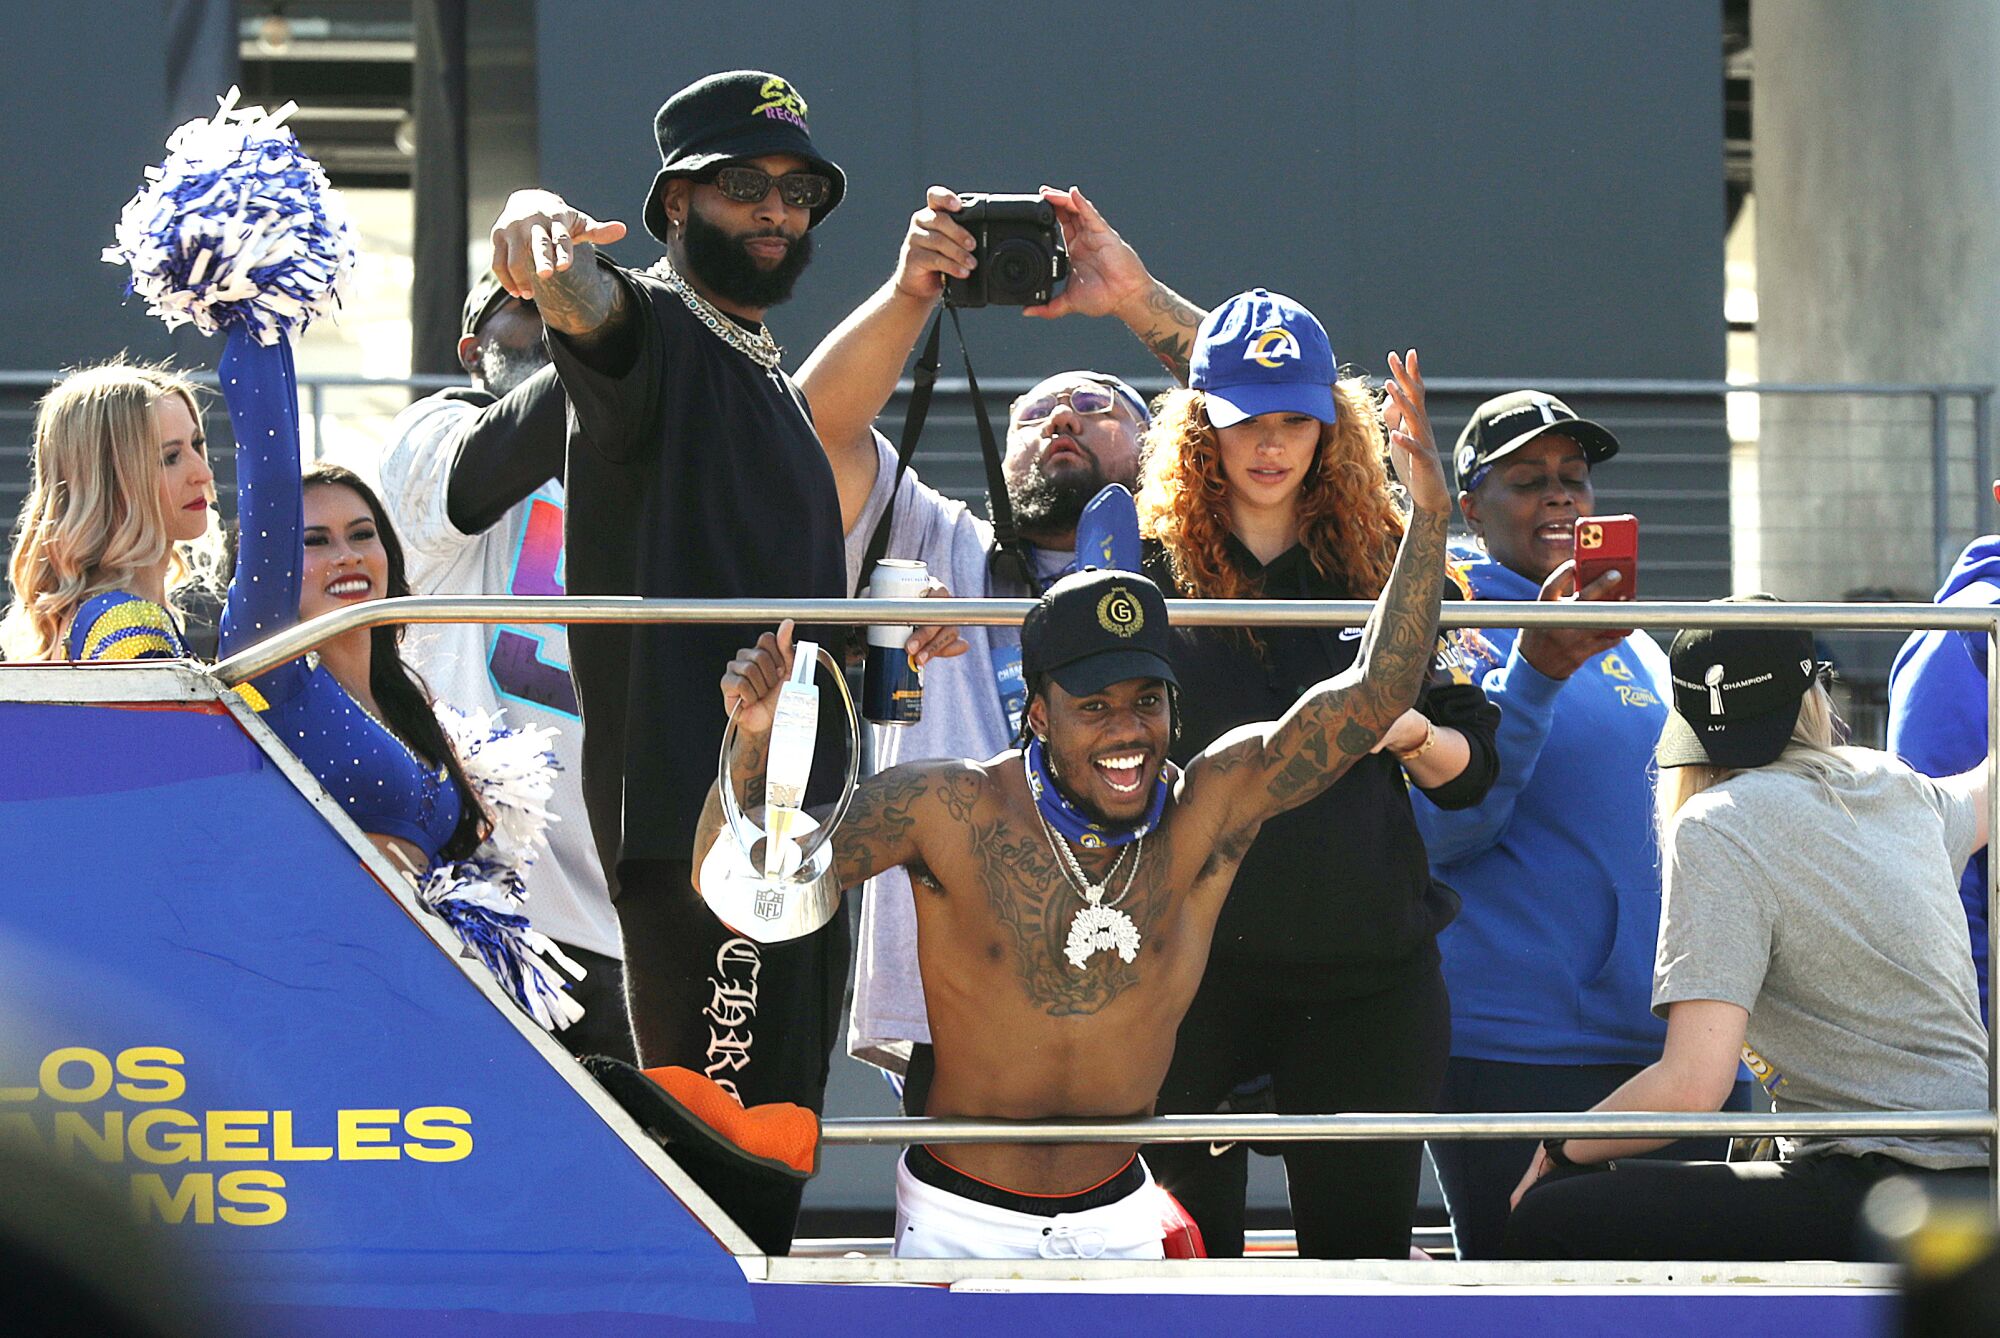 The Rams celebrate with fans during their victory parade in Los Angeles.